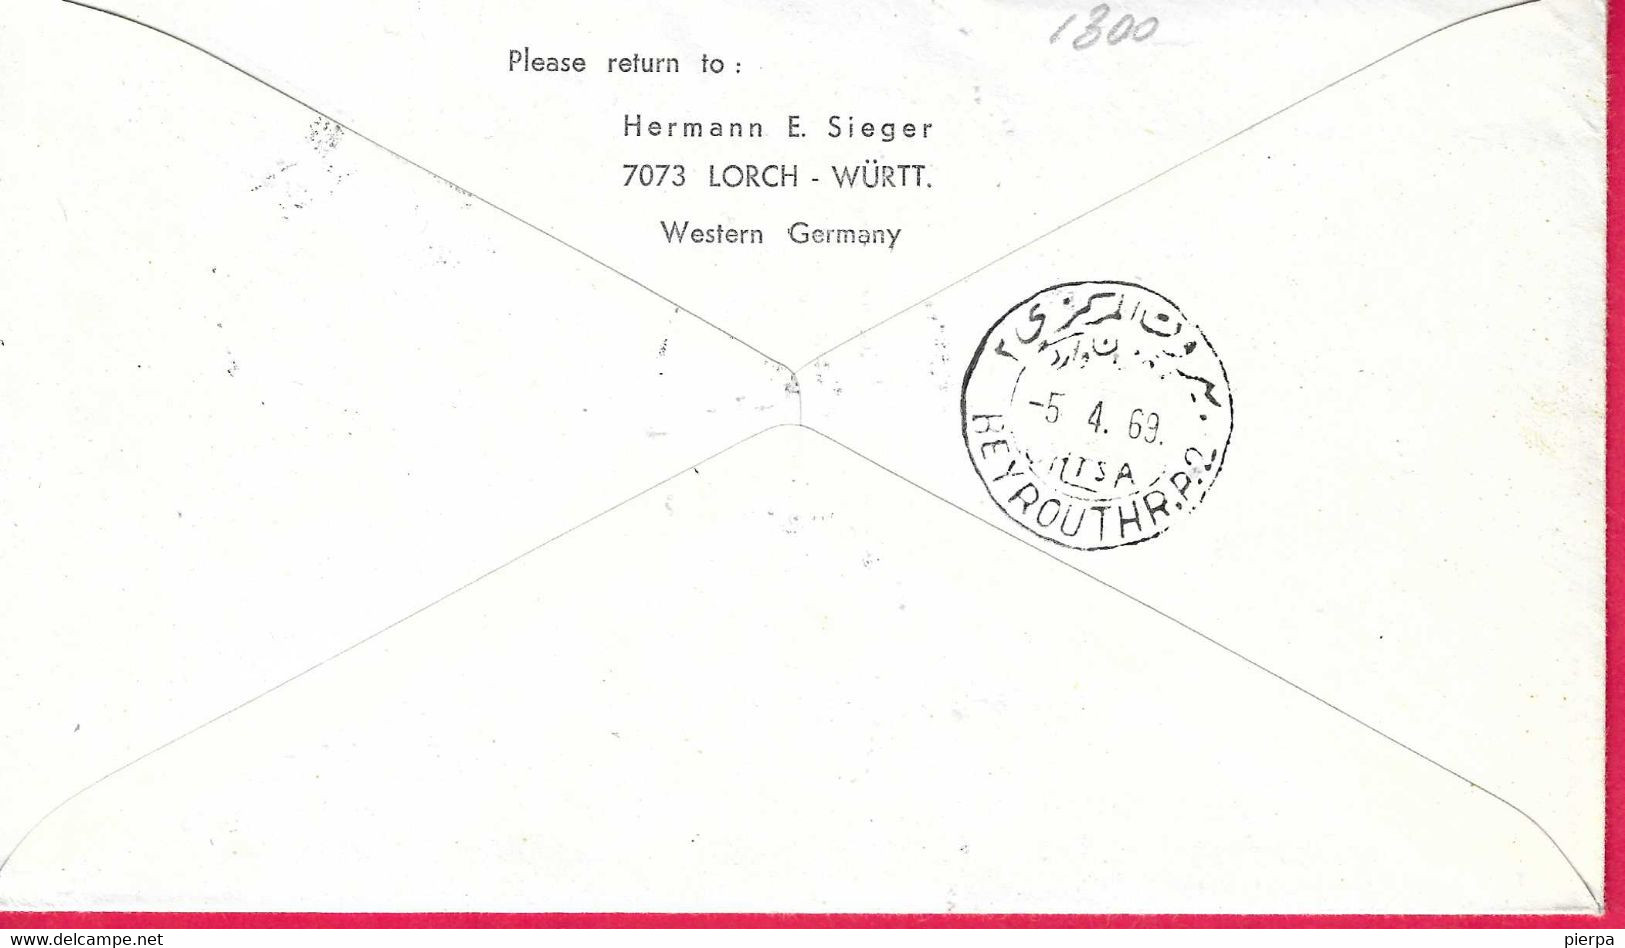 TURCHIA - FIRST FLIGHT BOING JET FROM ISTANBUL TO BEIRUT * 4.4.69* ON OFFICIAL REGISTERED ENVELOPE - Airmail